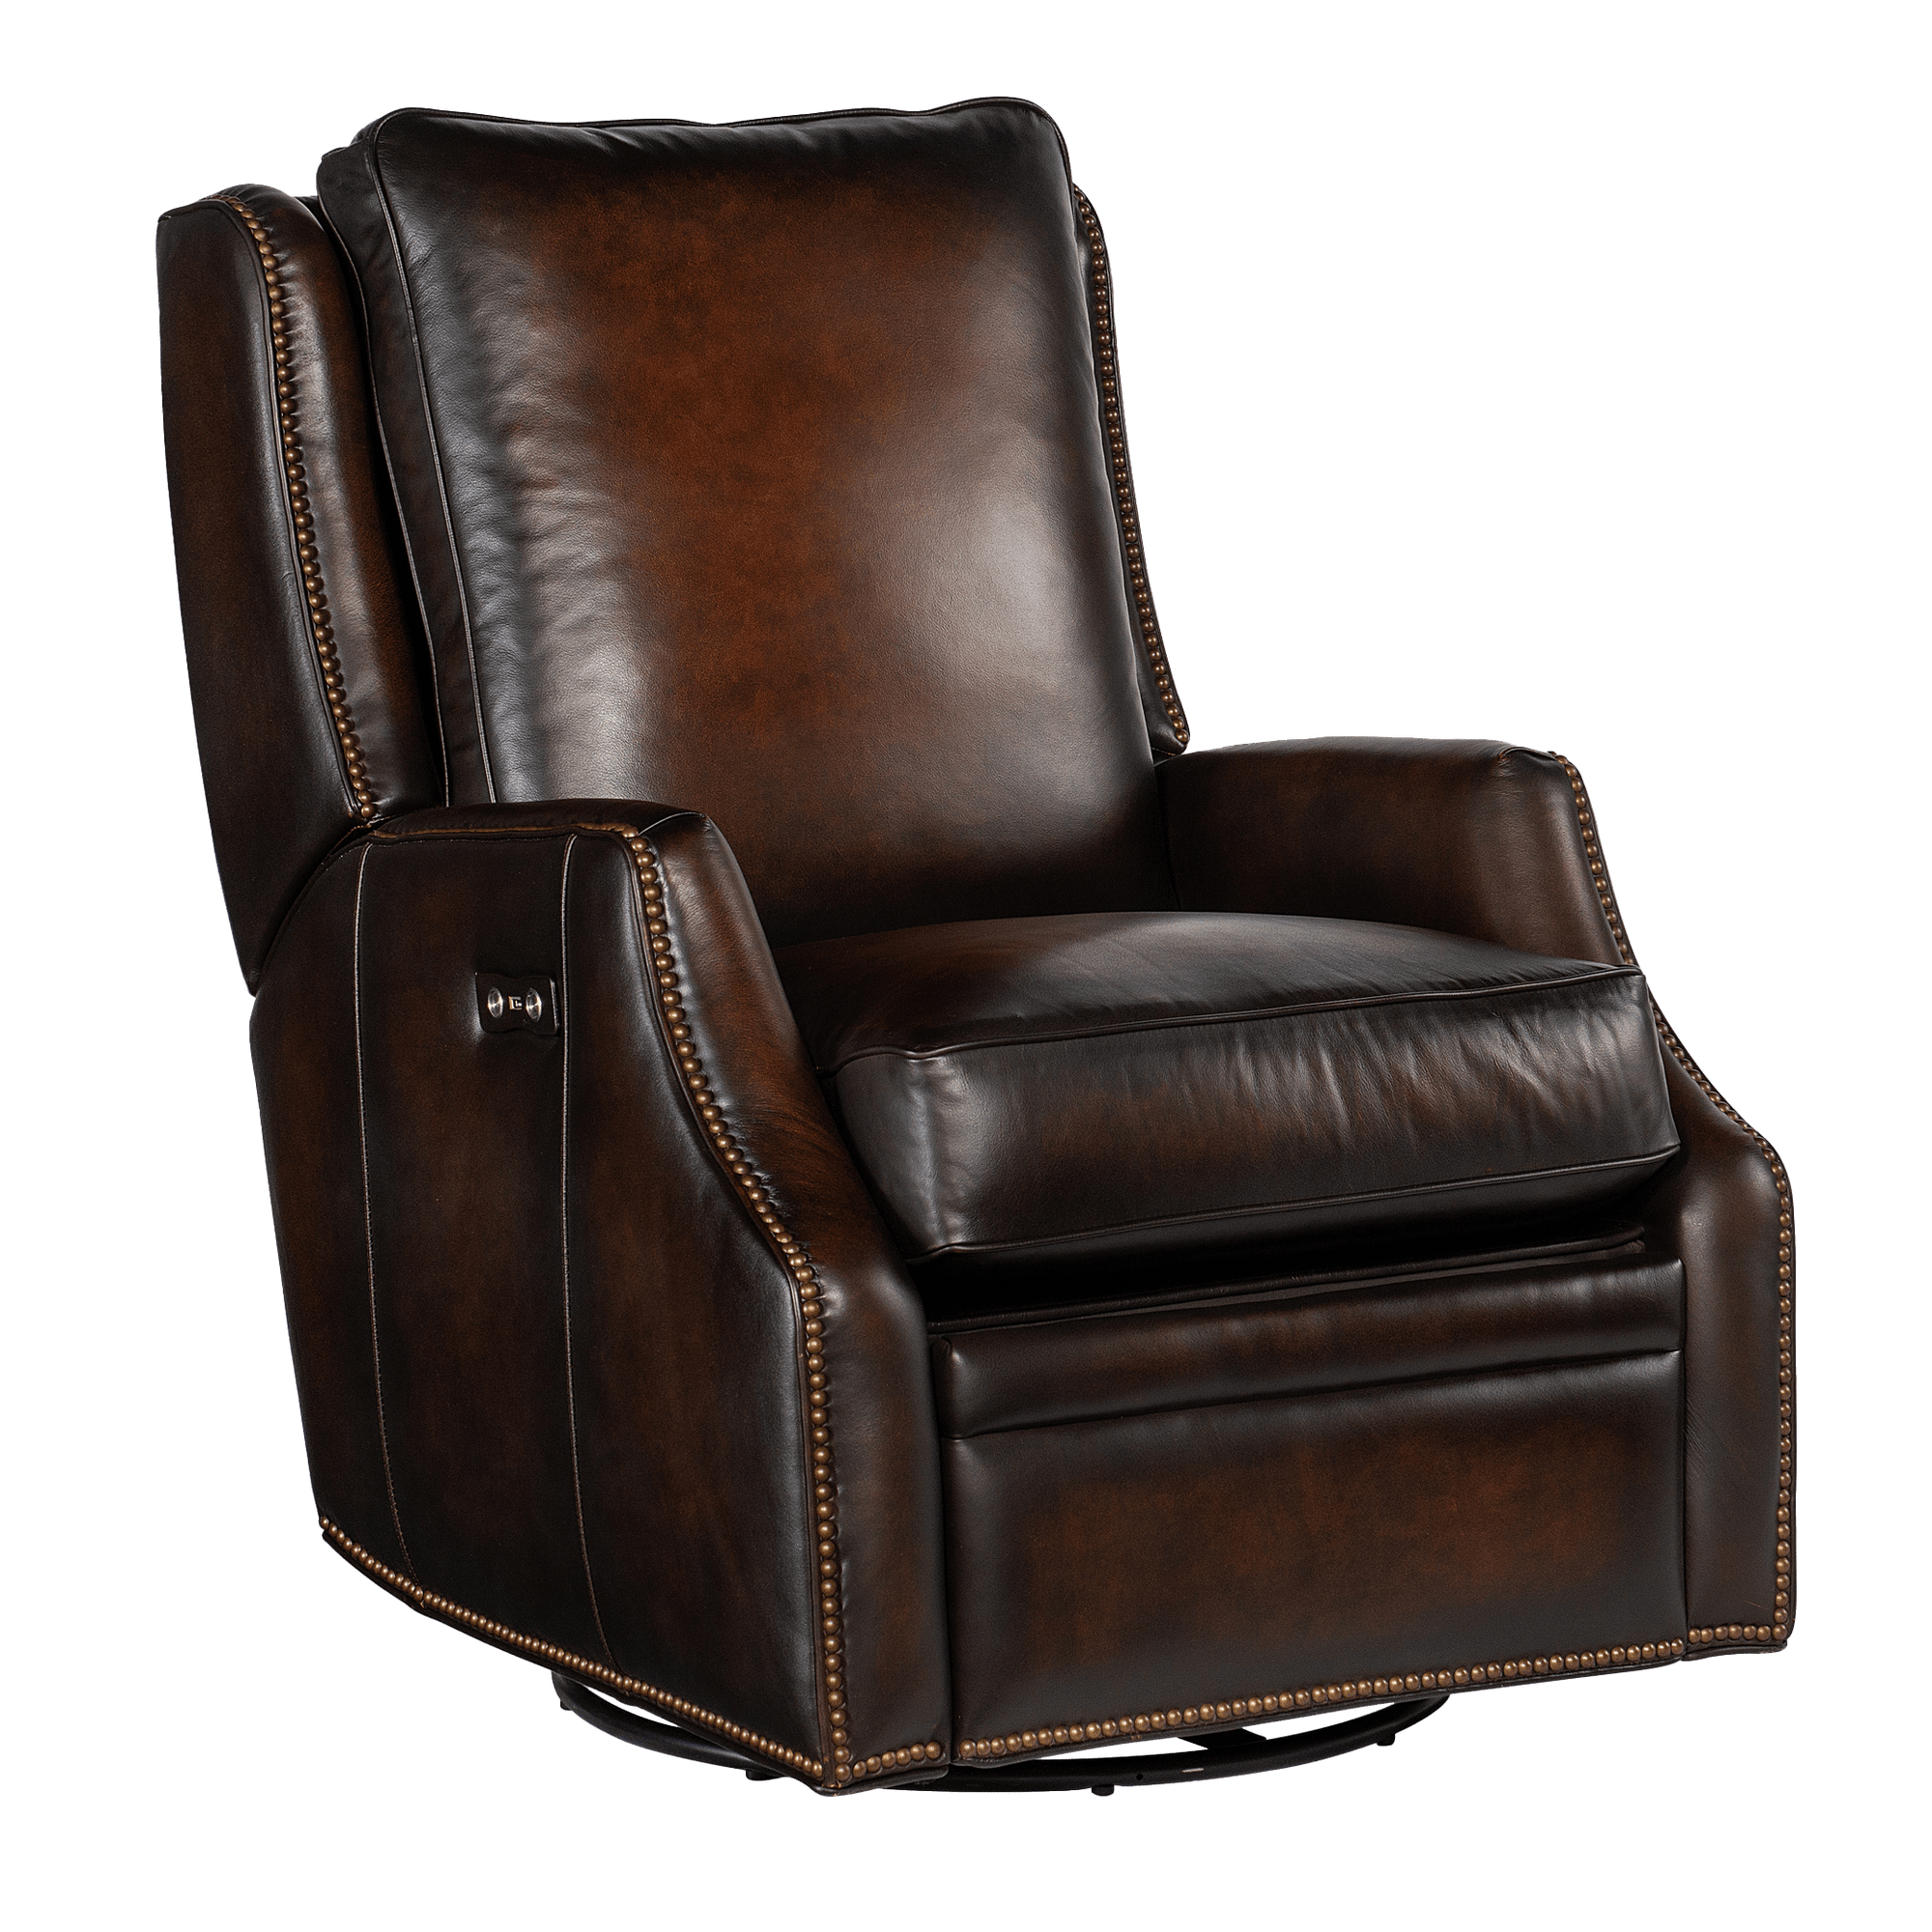 Elicce Power Swivel Glider Recliner, Leather - Coja